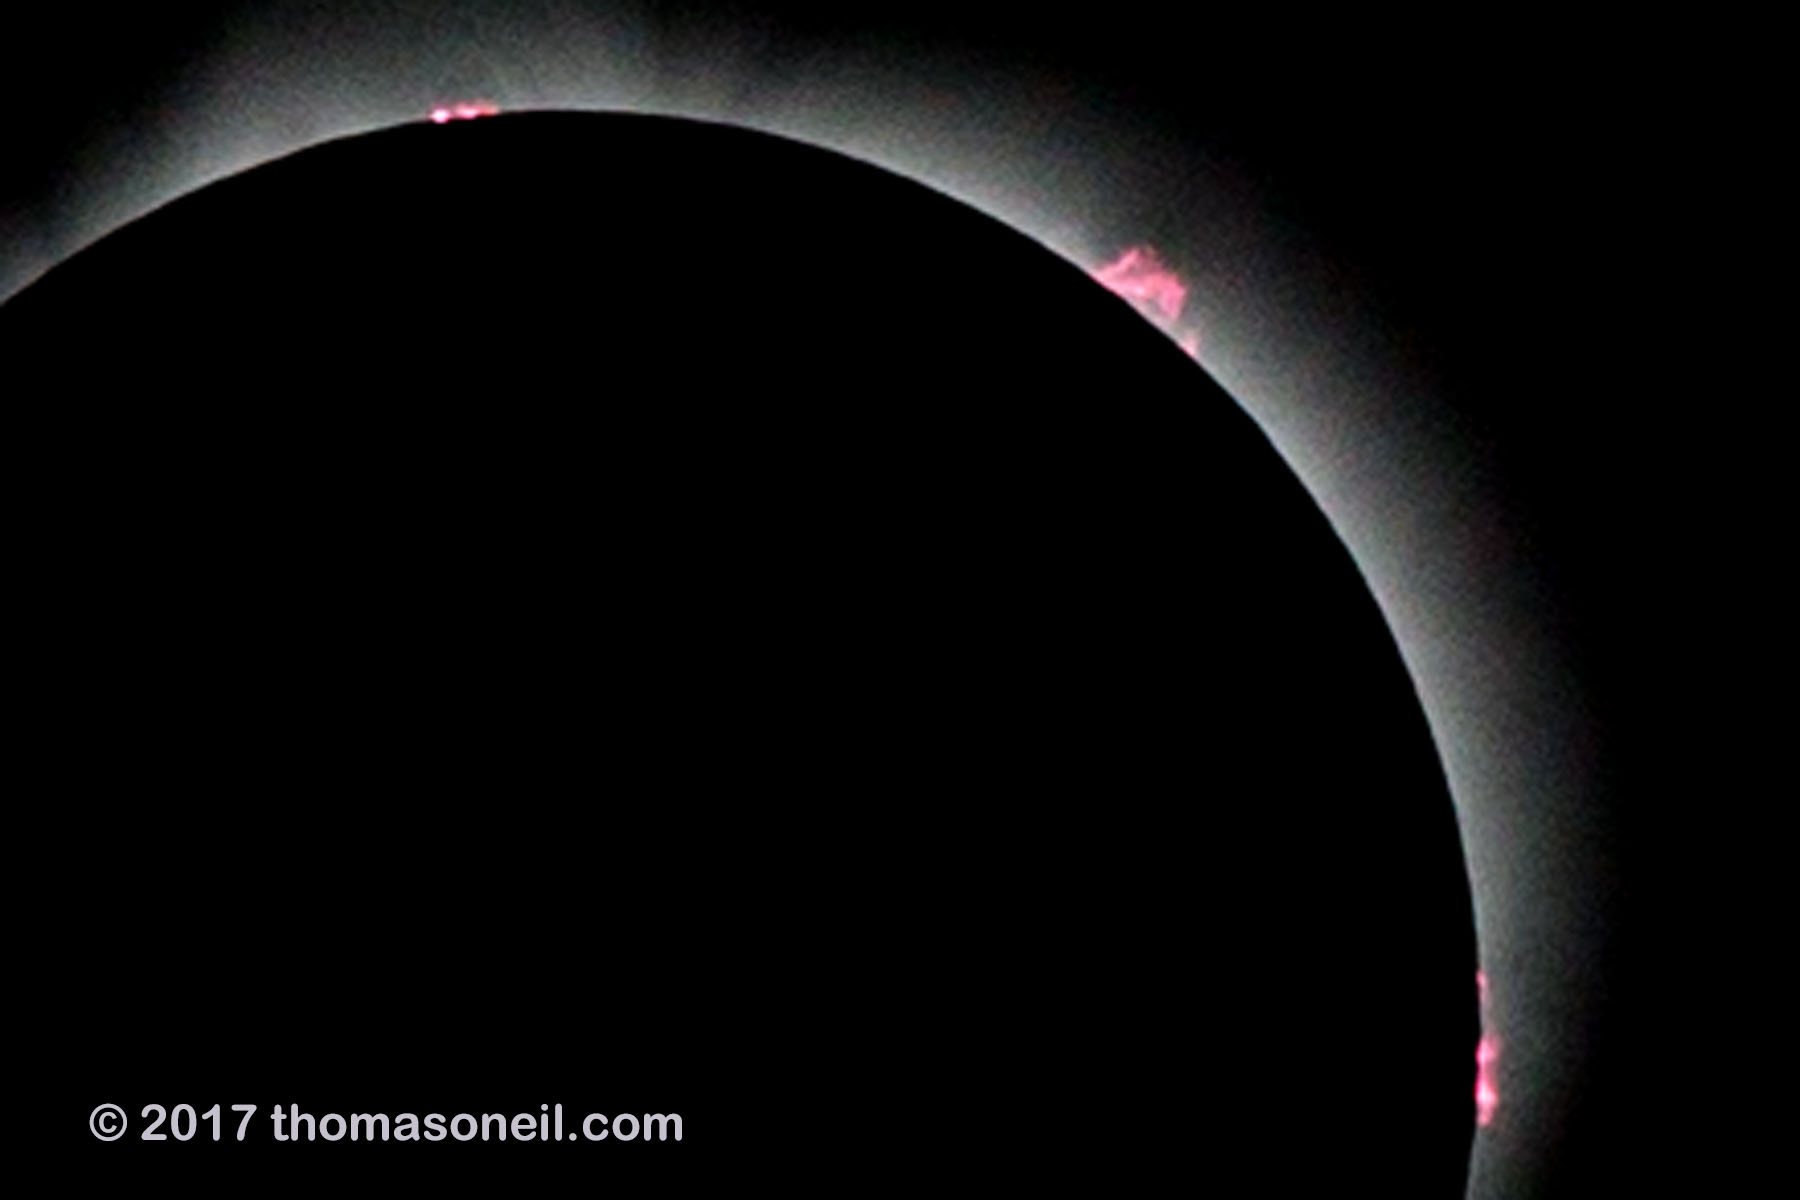 Solar eclipse, Aug. 21, 2017, a processed version of the previous image.  Very fast shutter speed (1/2500) reveals prominences rising from surface of the sun.  Click for next photo.